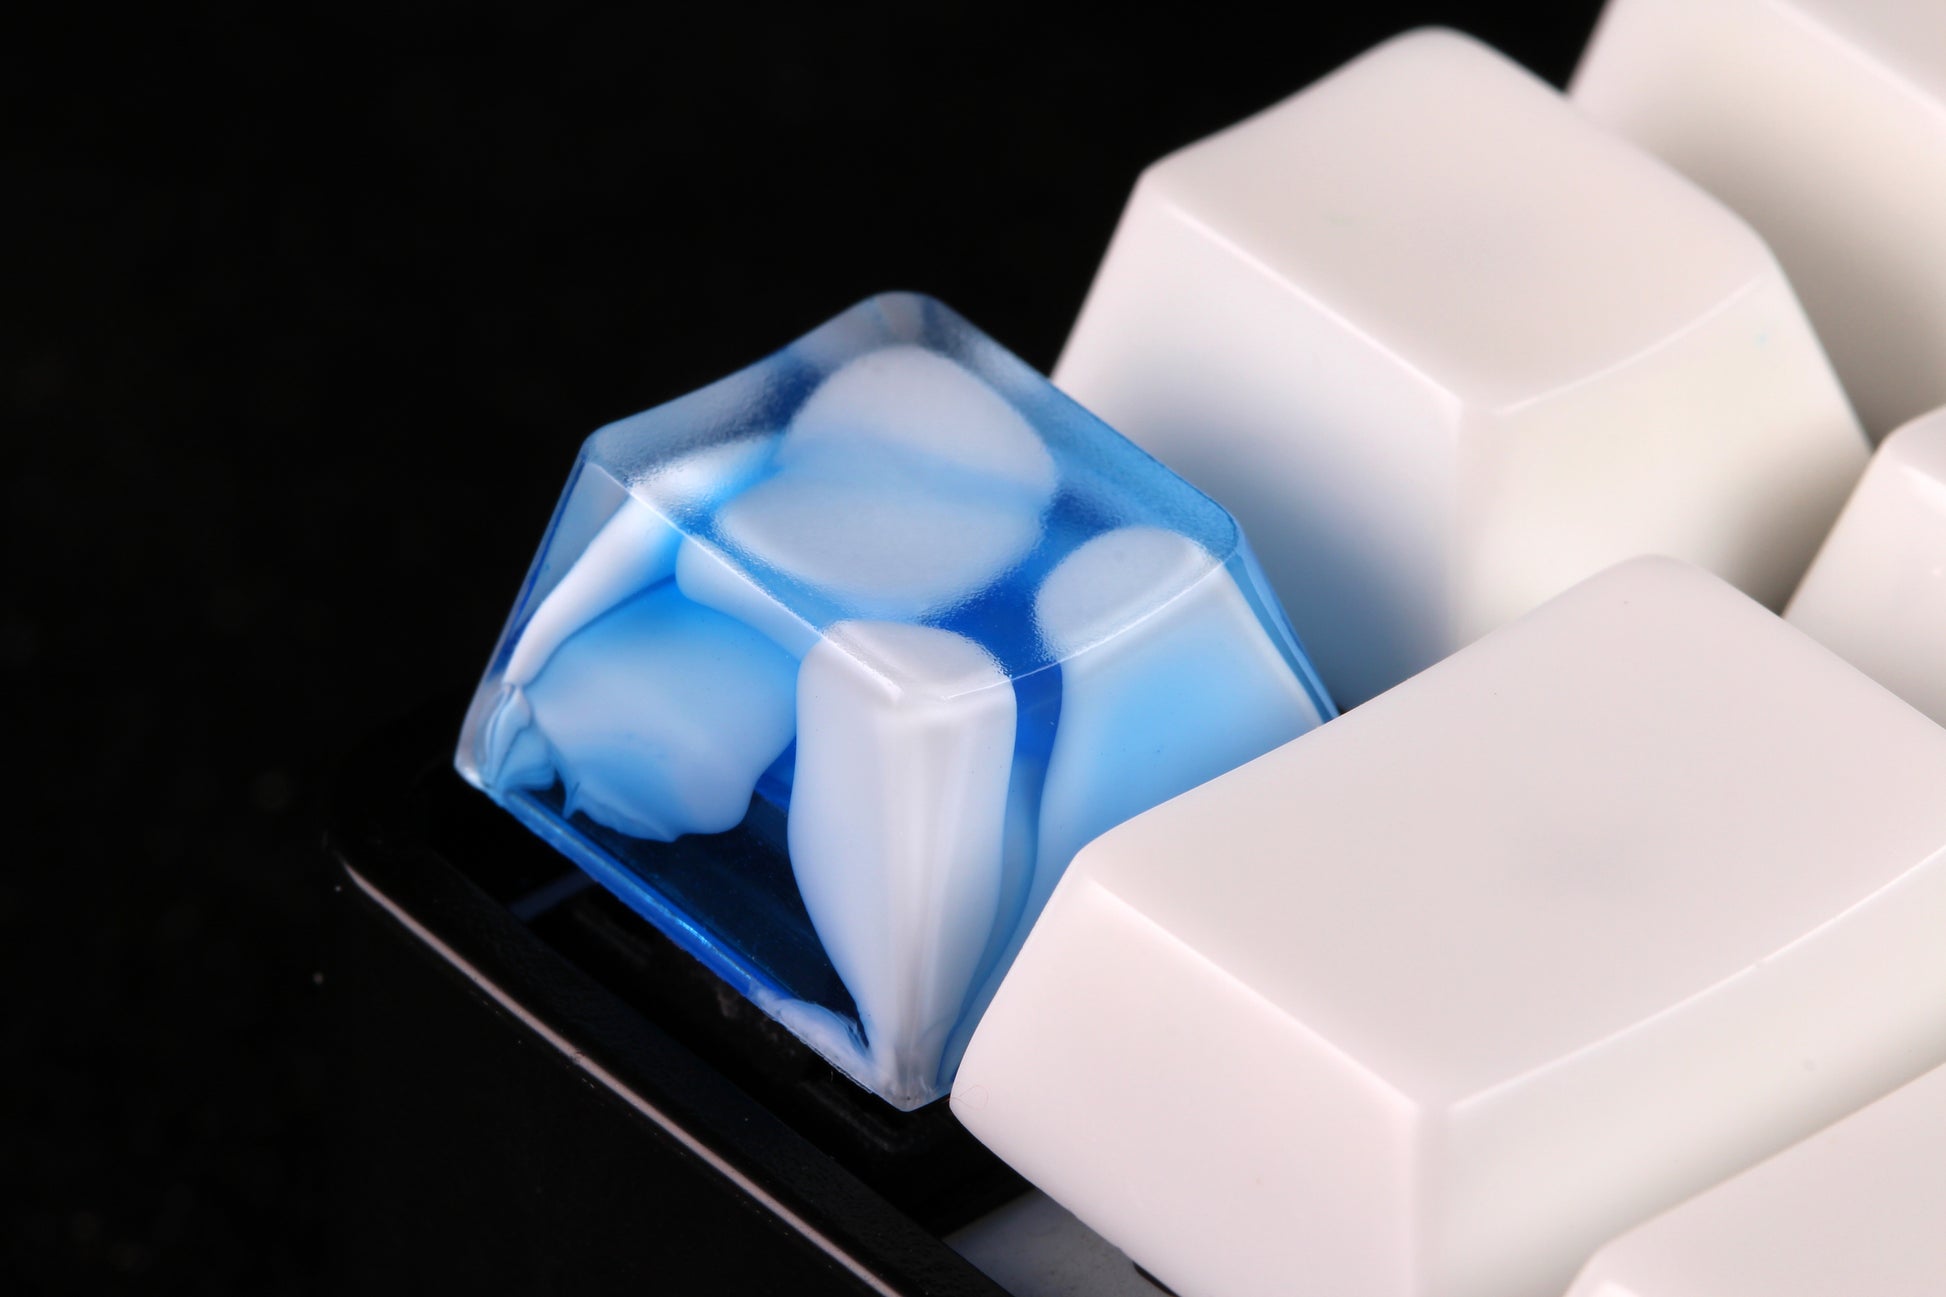 GMK Cherry Profile Cloud Chaser - Nimbus Row 1 - 3 - PrimeCaps Keycap - Blank and Sculpted Artisan Keycaps for cherry MX mechanical keyboards 